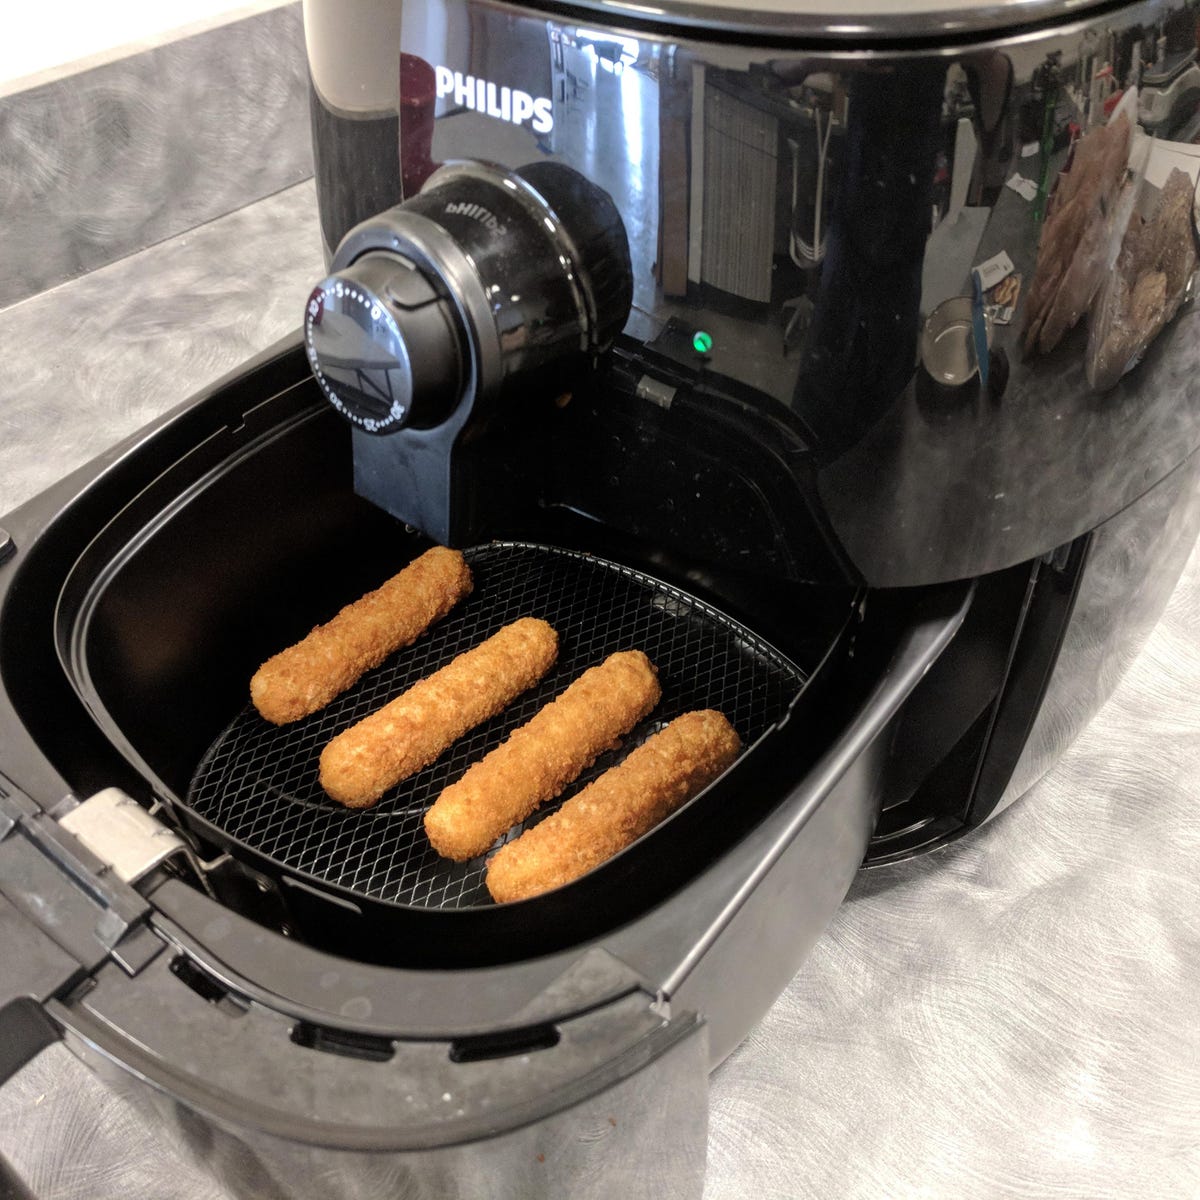 How to fry foods without using oil - CNET